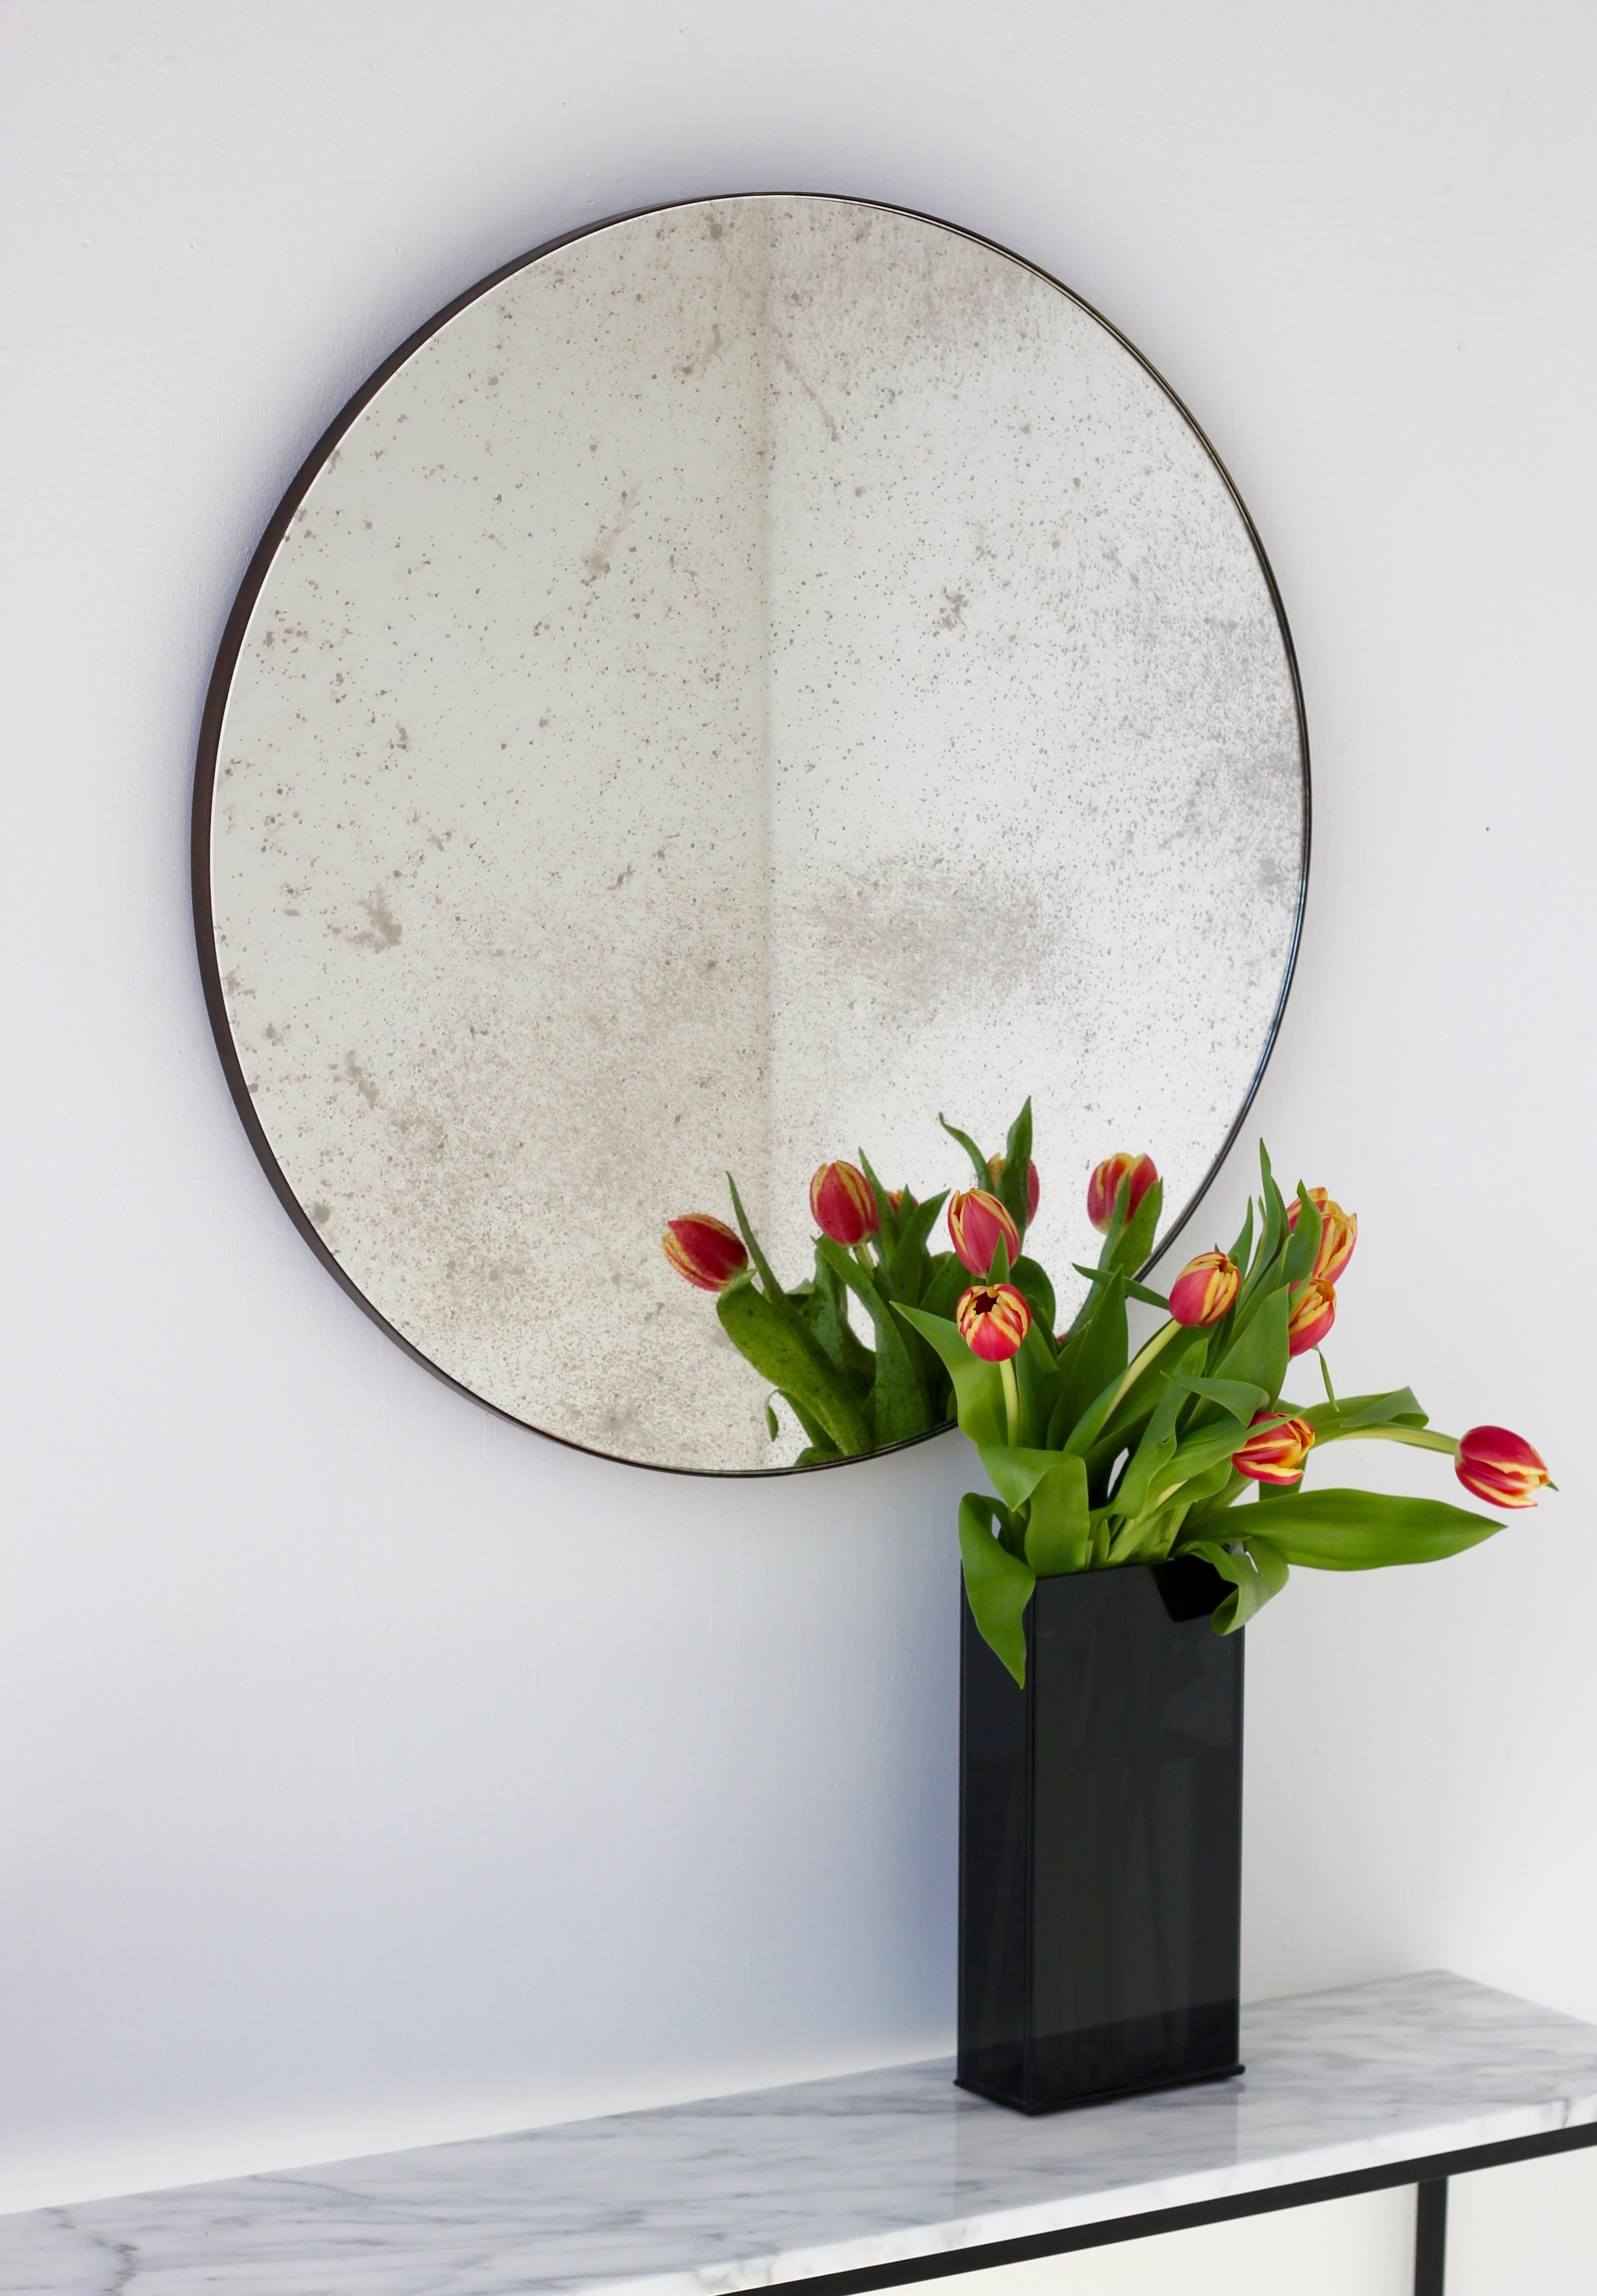 Art Deco style antiqued Orbis™ round mirror with a minimalist bronze patina brass frame. Designed and handcrafted in London, UK.

Our mirrors are designed with an integrated French cleat (split batten) system that ensures the mirror is securely